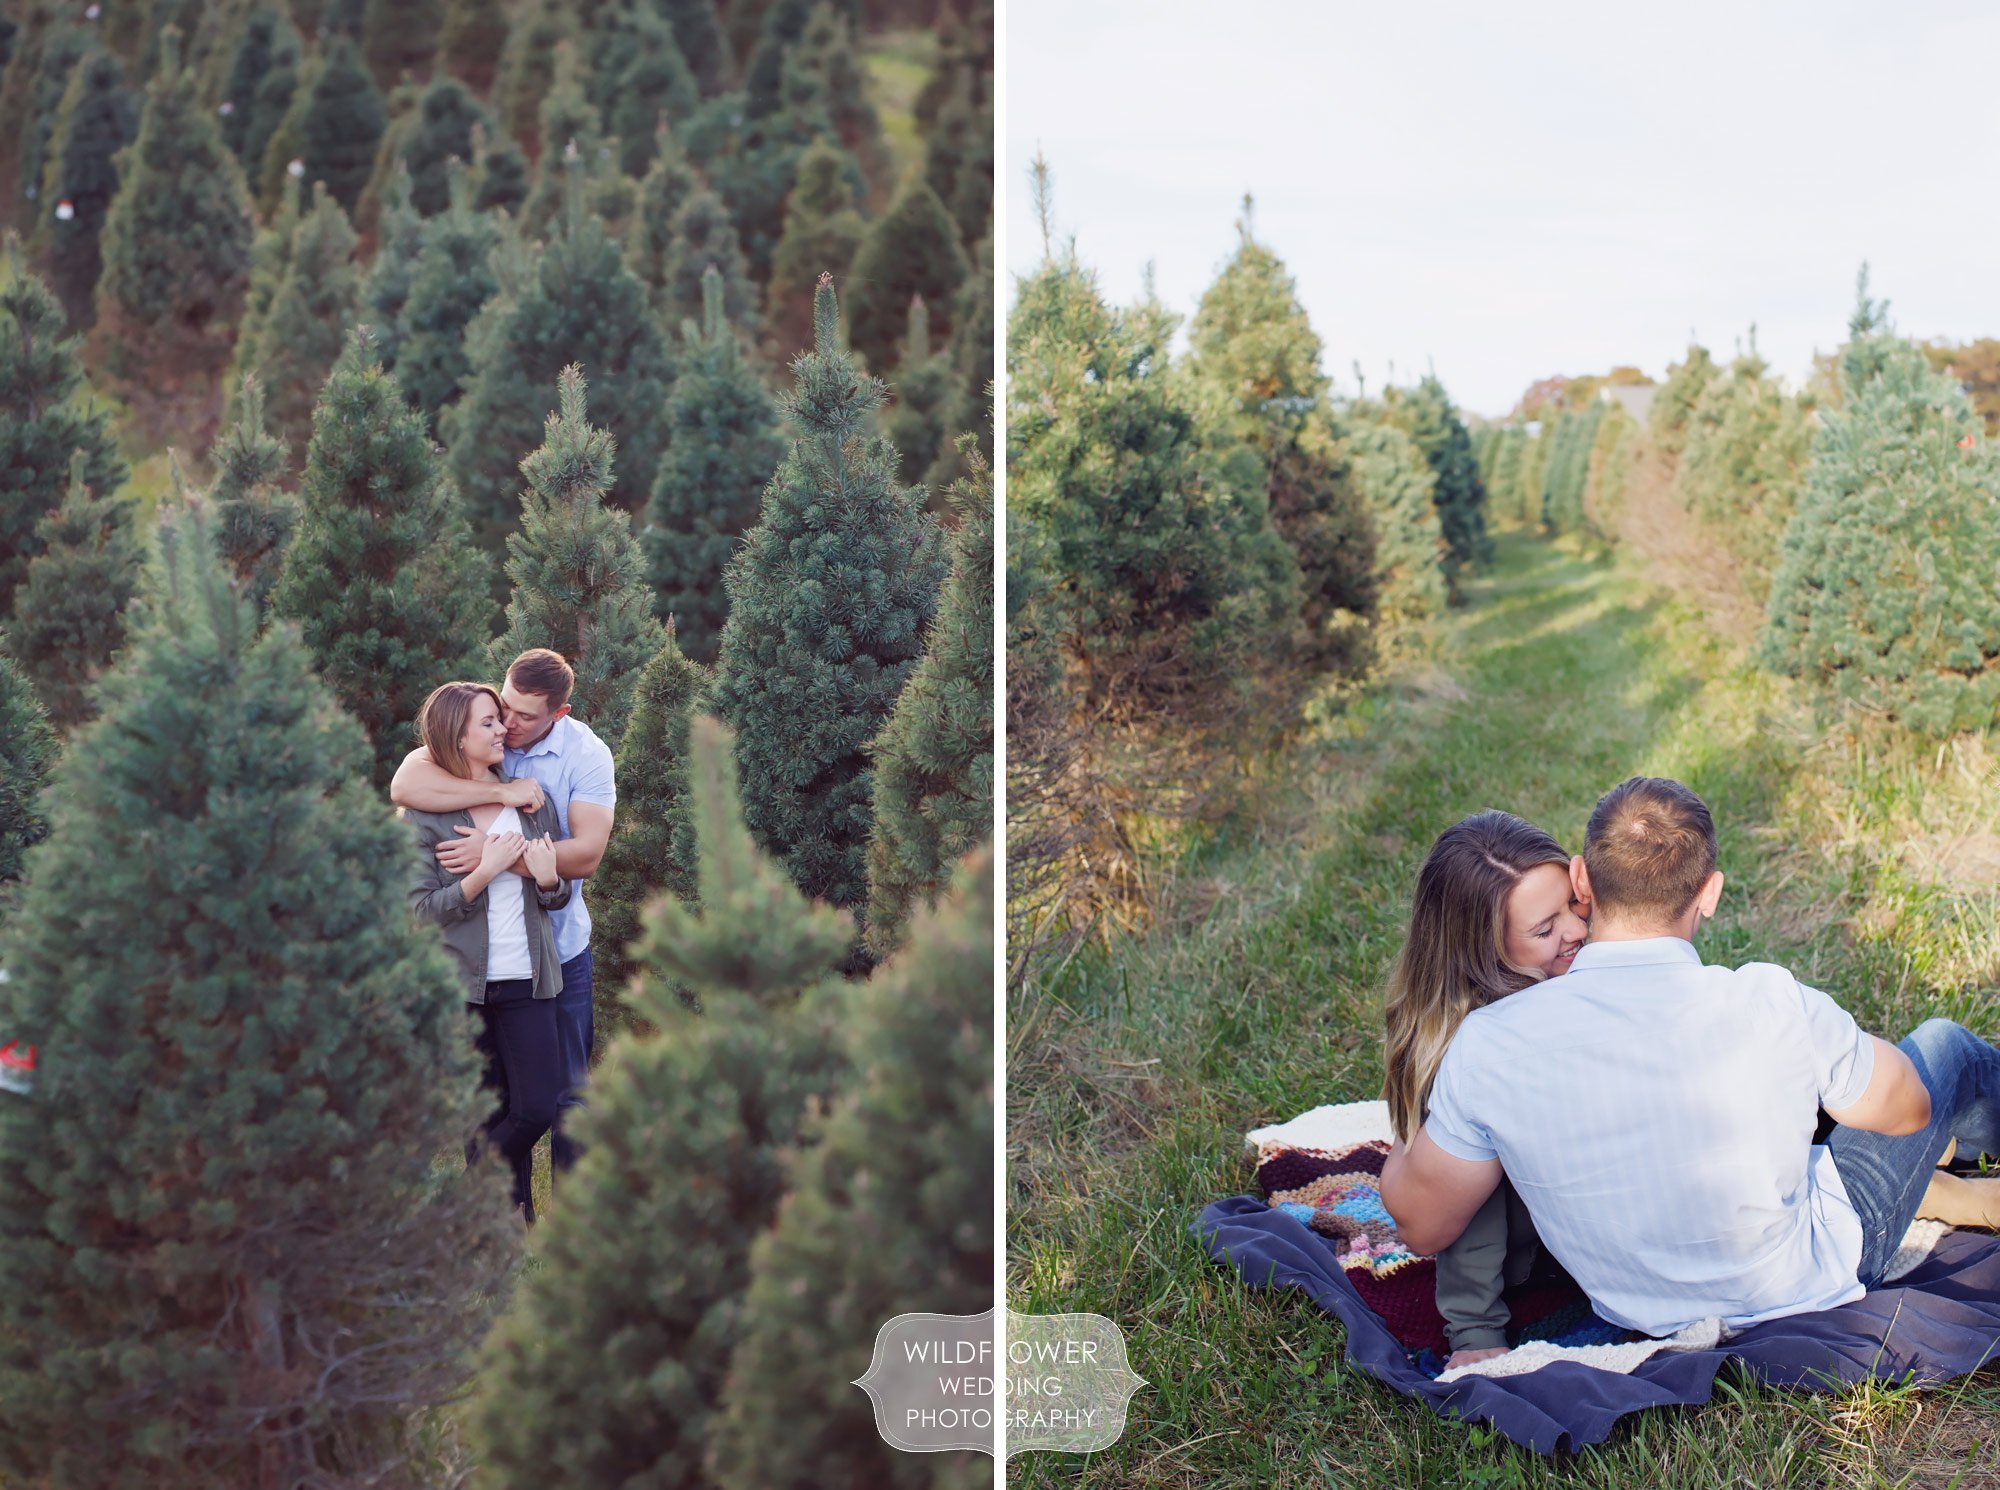 Rustic engagement photography session at the Timberview Tree Farm in Columbia, MO.